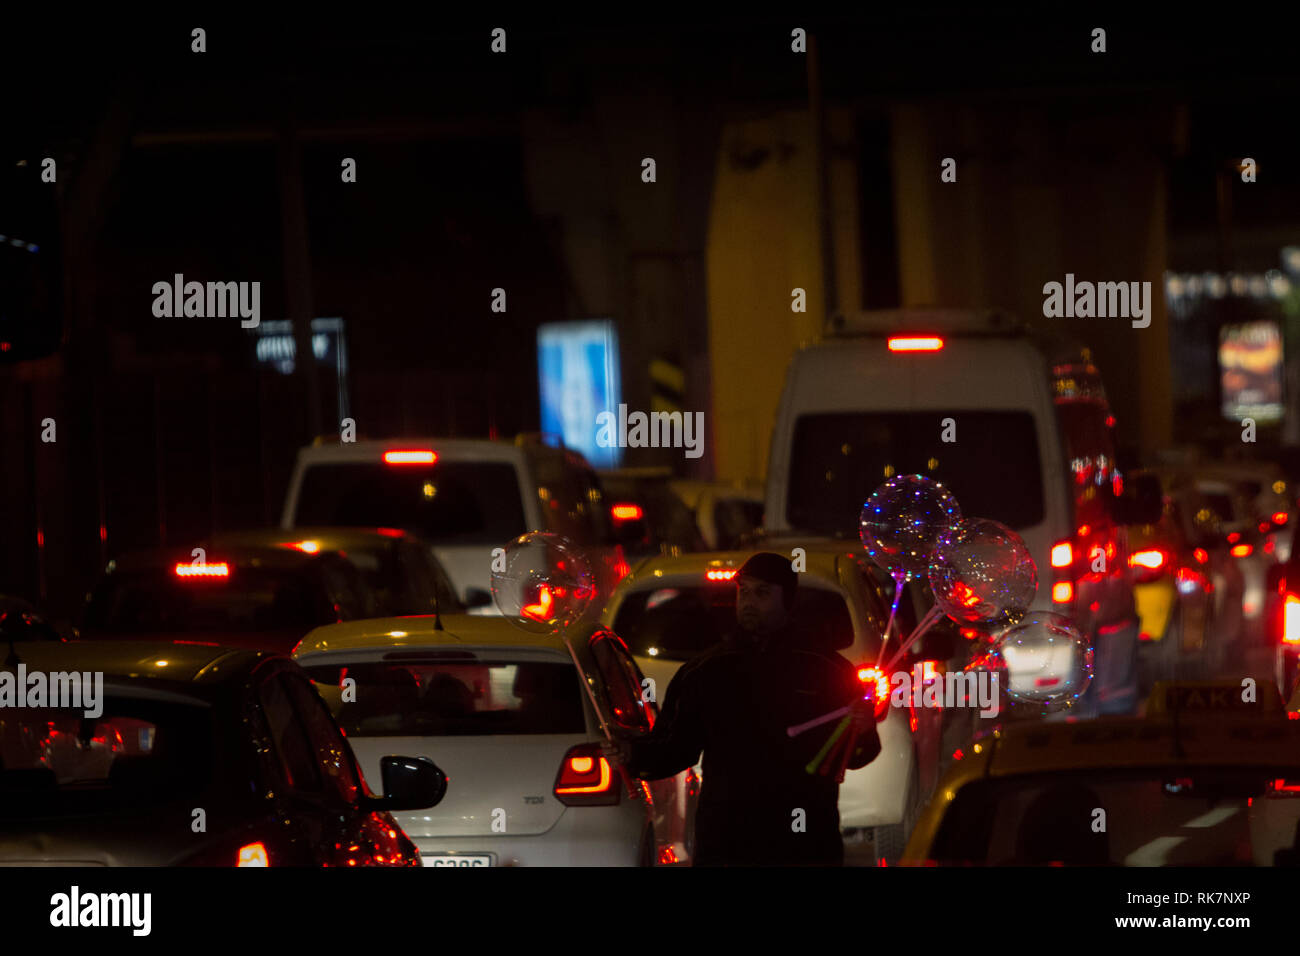 Vendor man sells led-light balloons at night at highway during a traffic jam in Altunizade, Asian side of Istanbul. Stock Photo